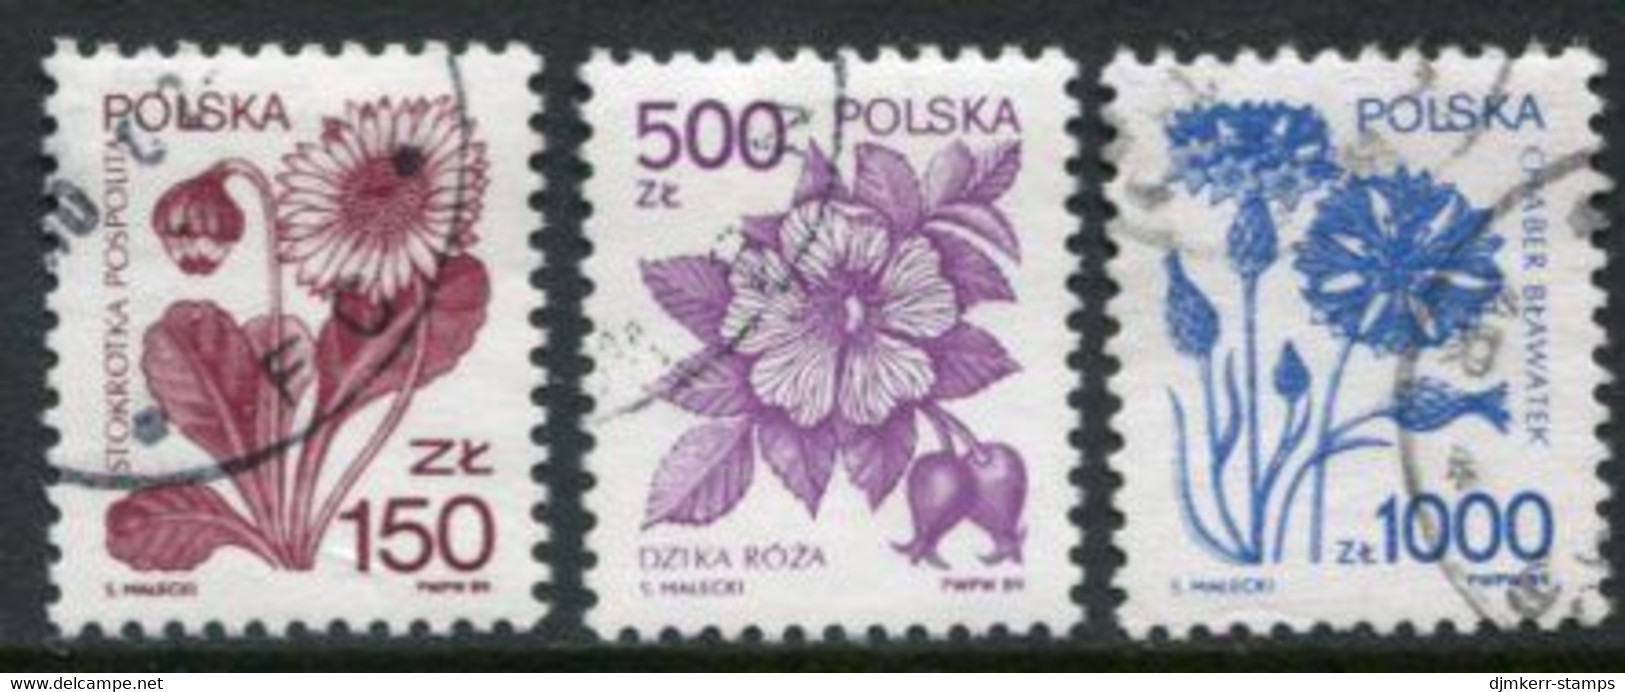 POLAND 1989 Definitive: Medicinal Plants Used.  Michel 3235, 3245-46 - Used Stamps